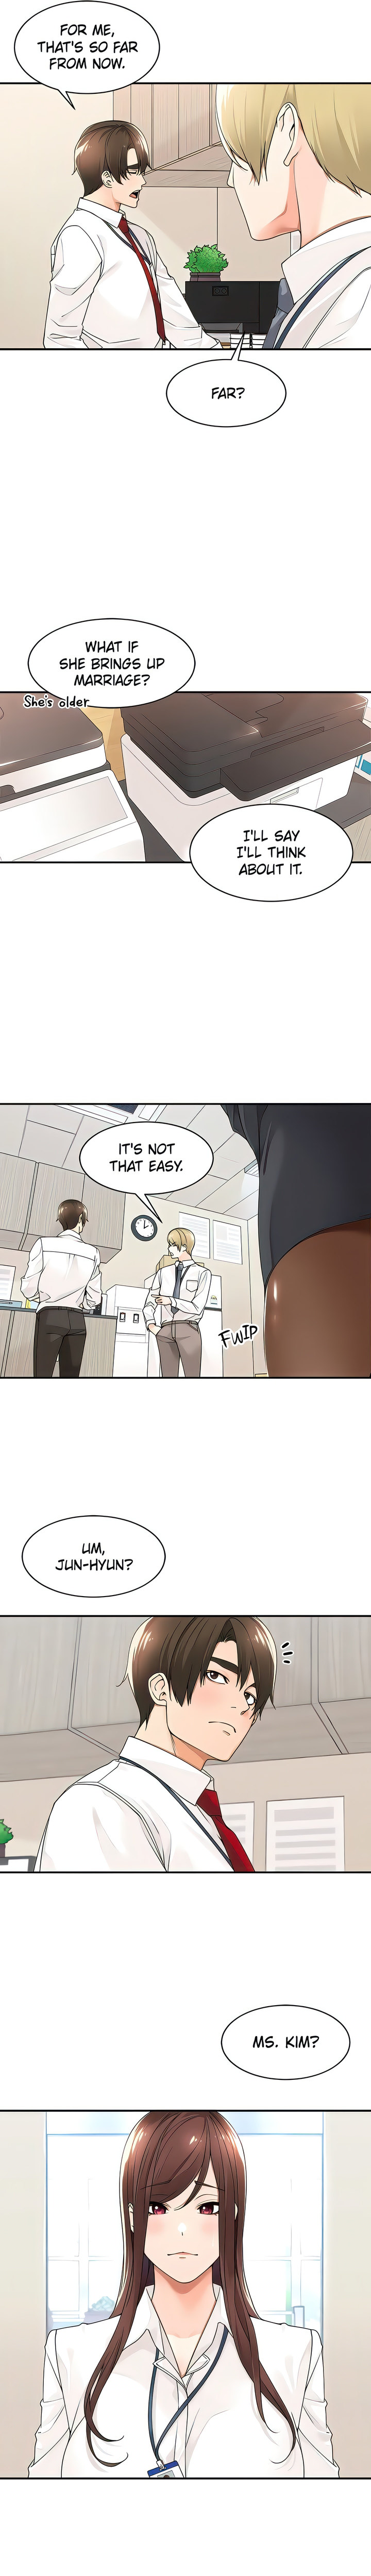 Manager, Please Scold Me - Chapter 29 Page 3